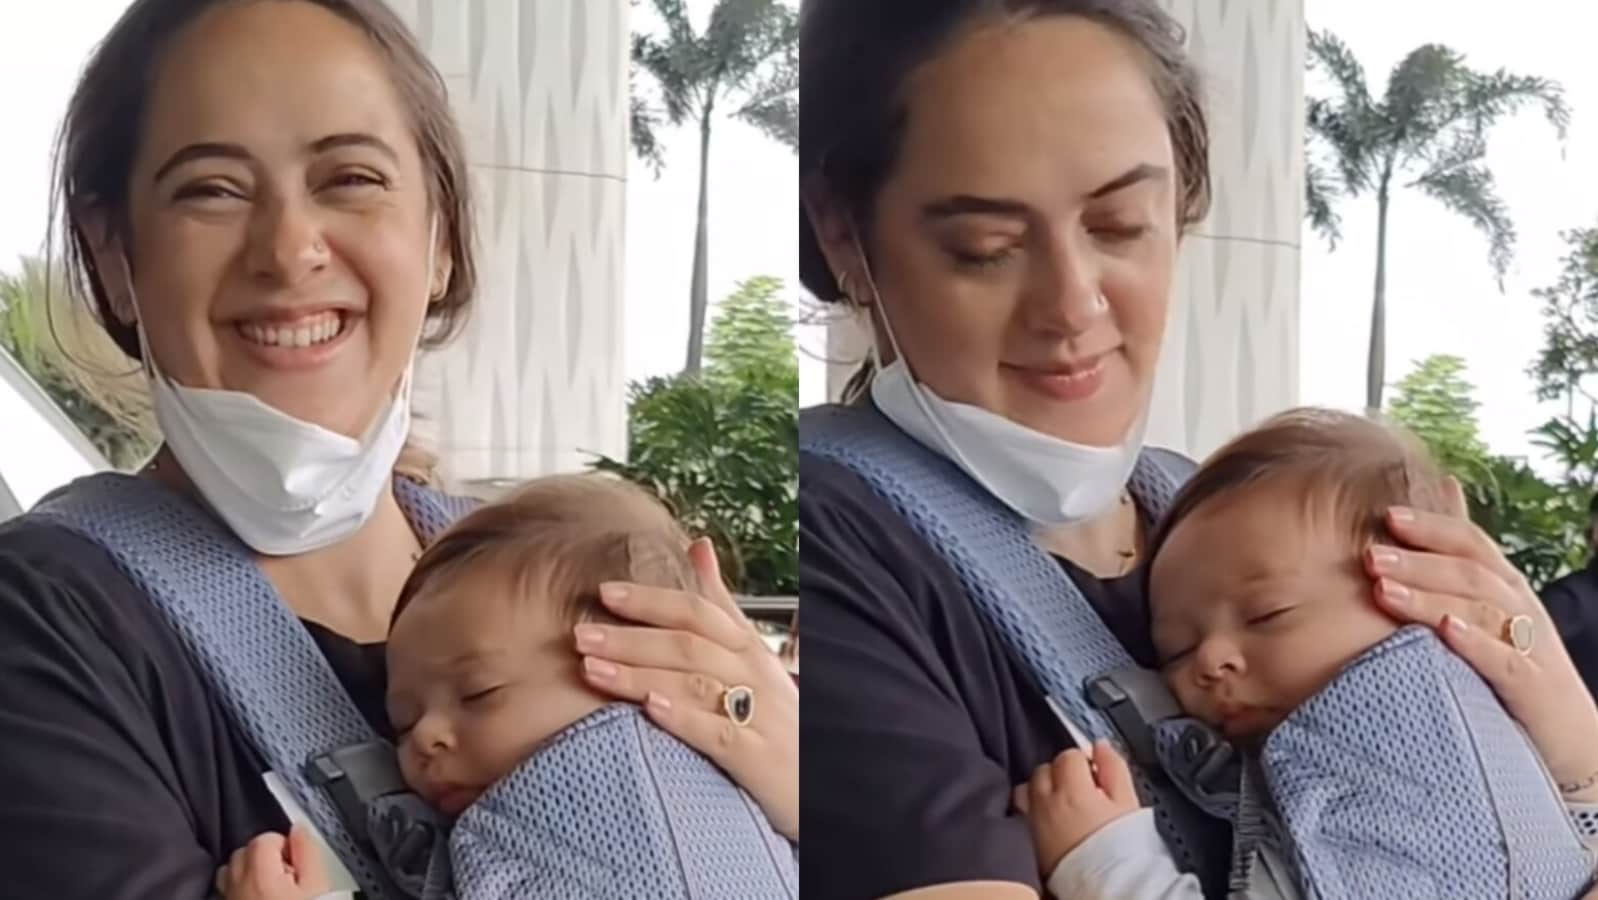 Hazel Keech thanks paparazzi for not scaring son Orion at Mumbai airport: ‘Show of consideration and respect’